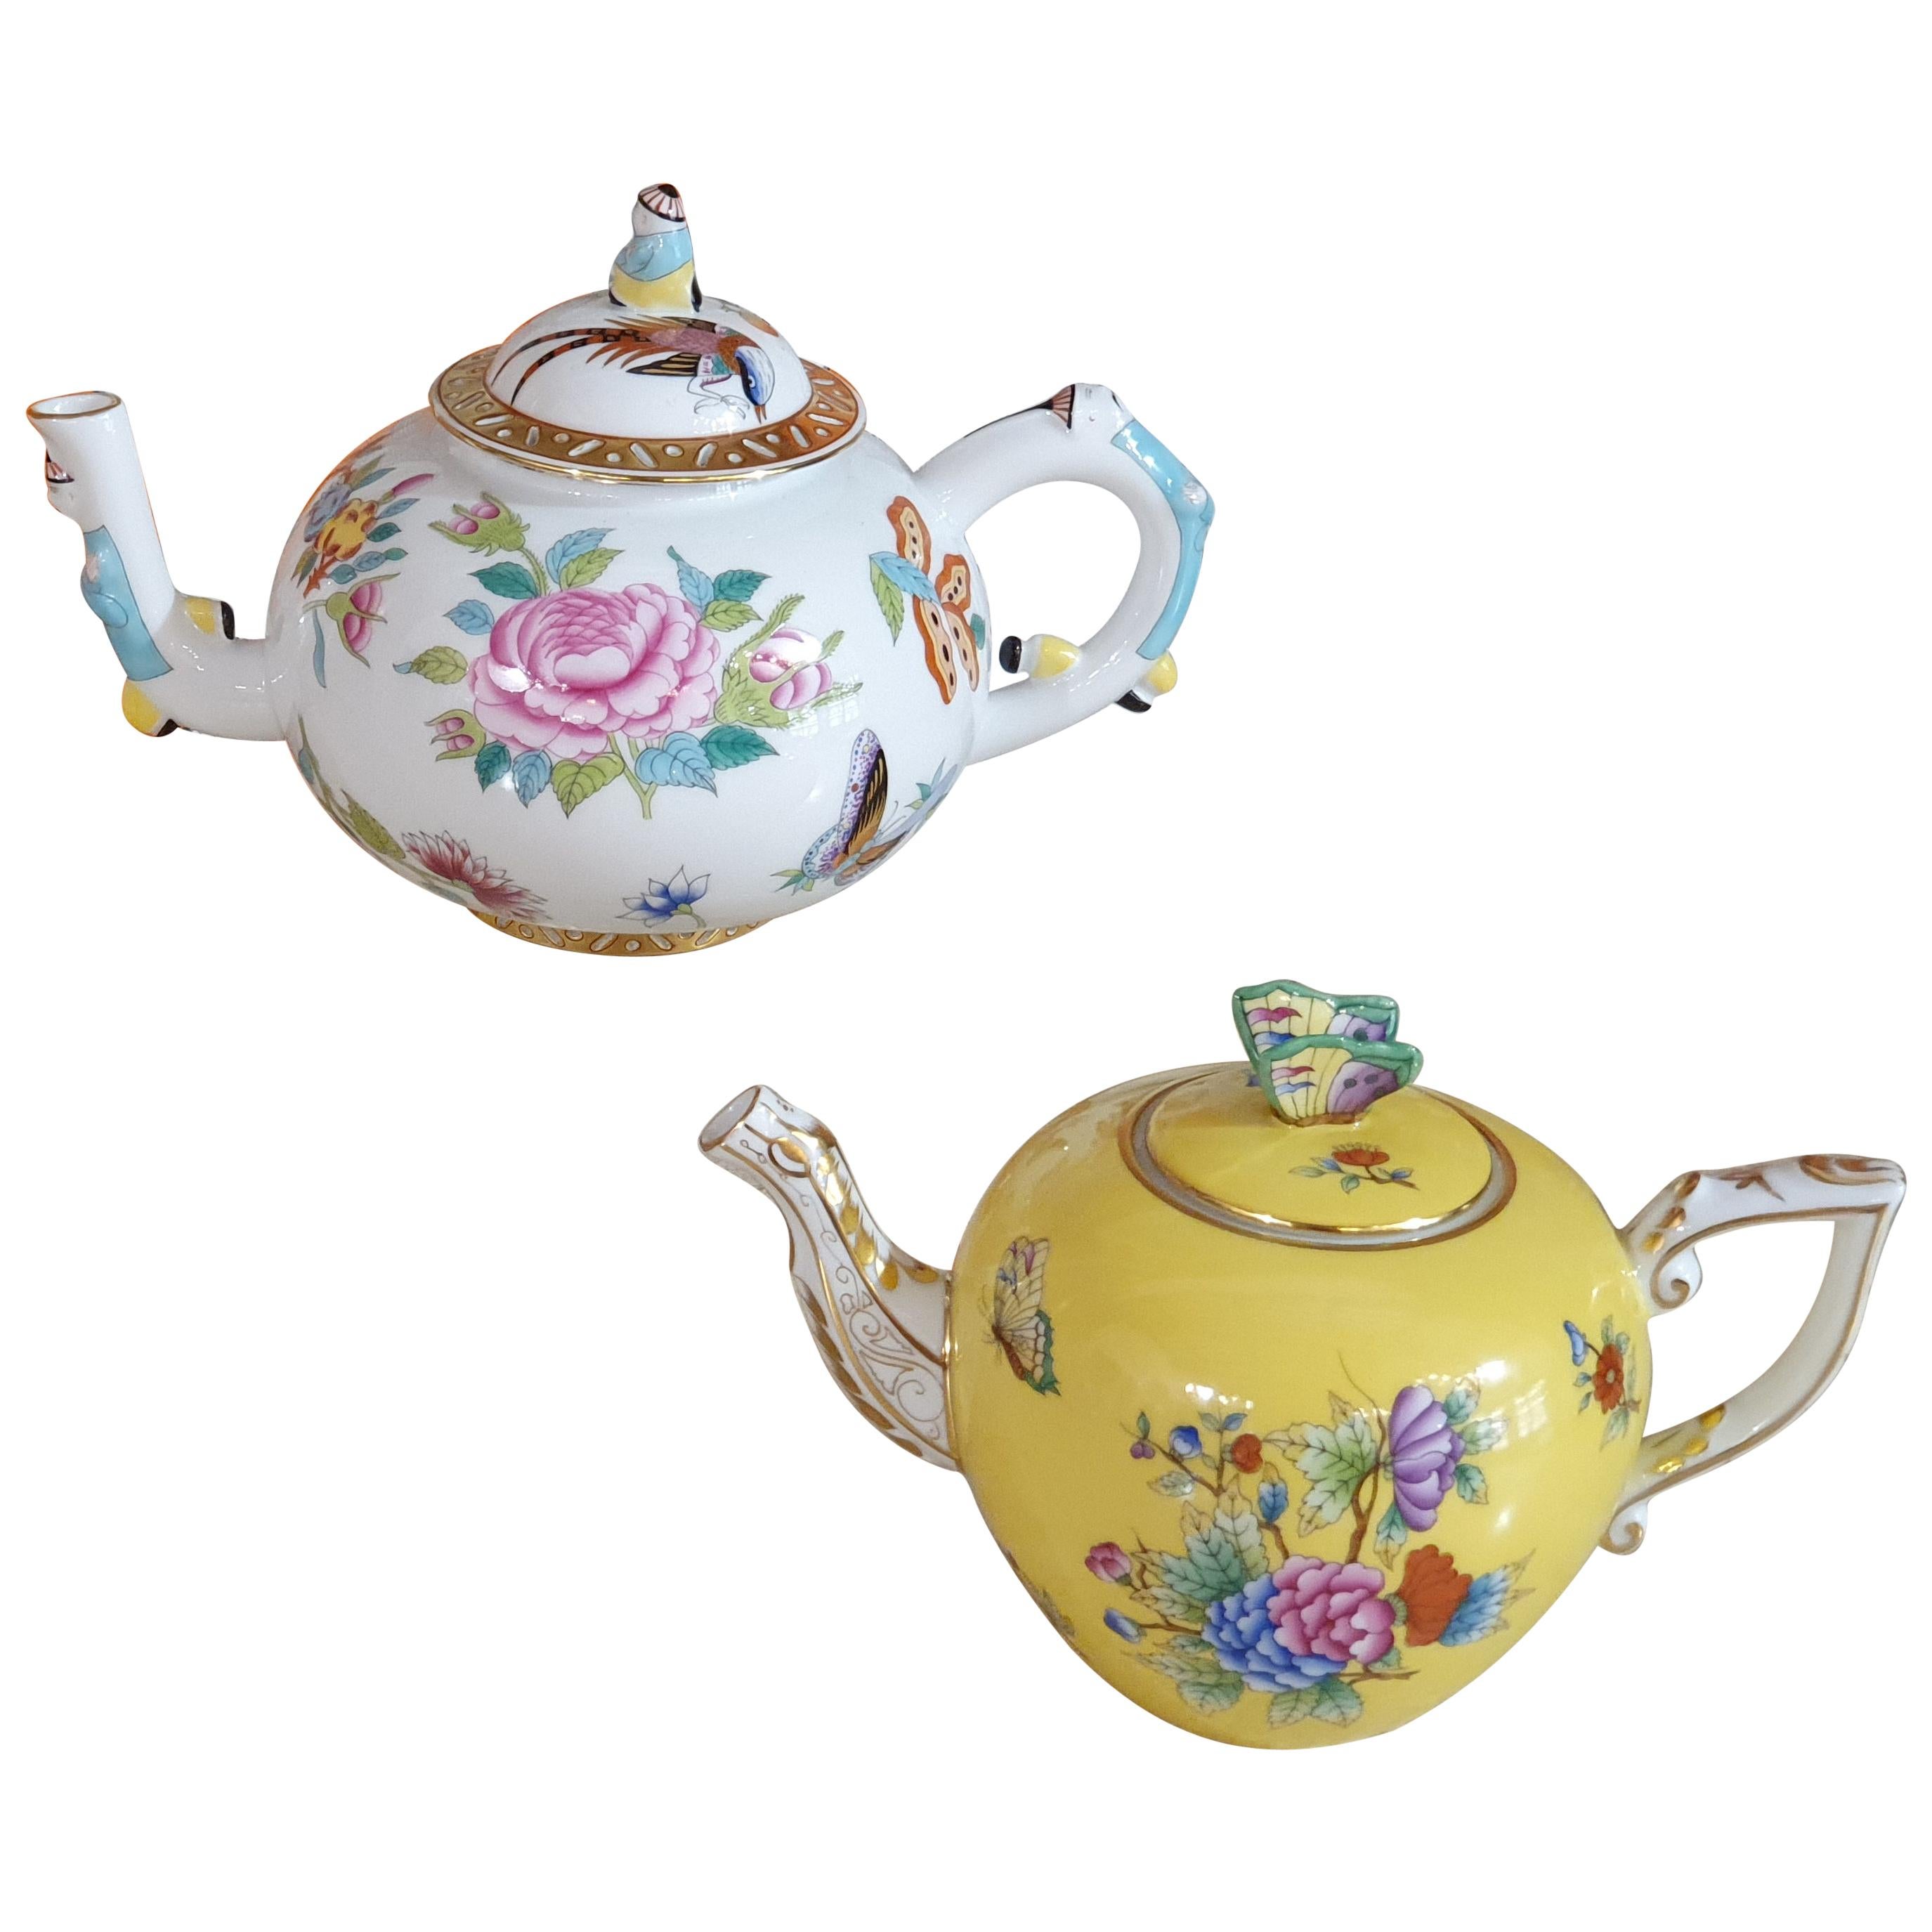 Herend Hand Painted Polycrome Porcelain Set of Two Teapot, Hungary, Modern